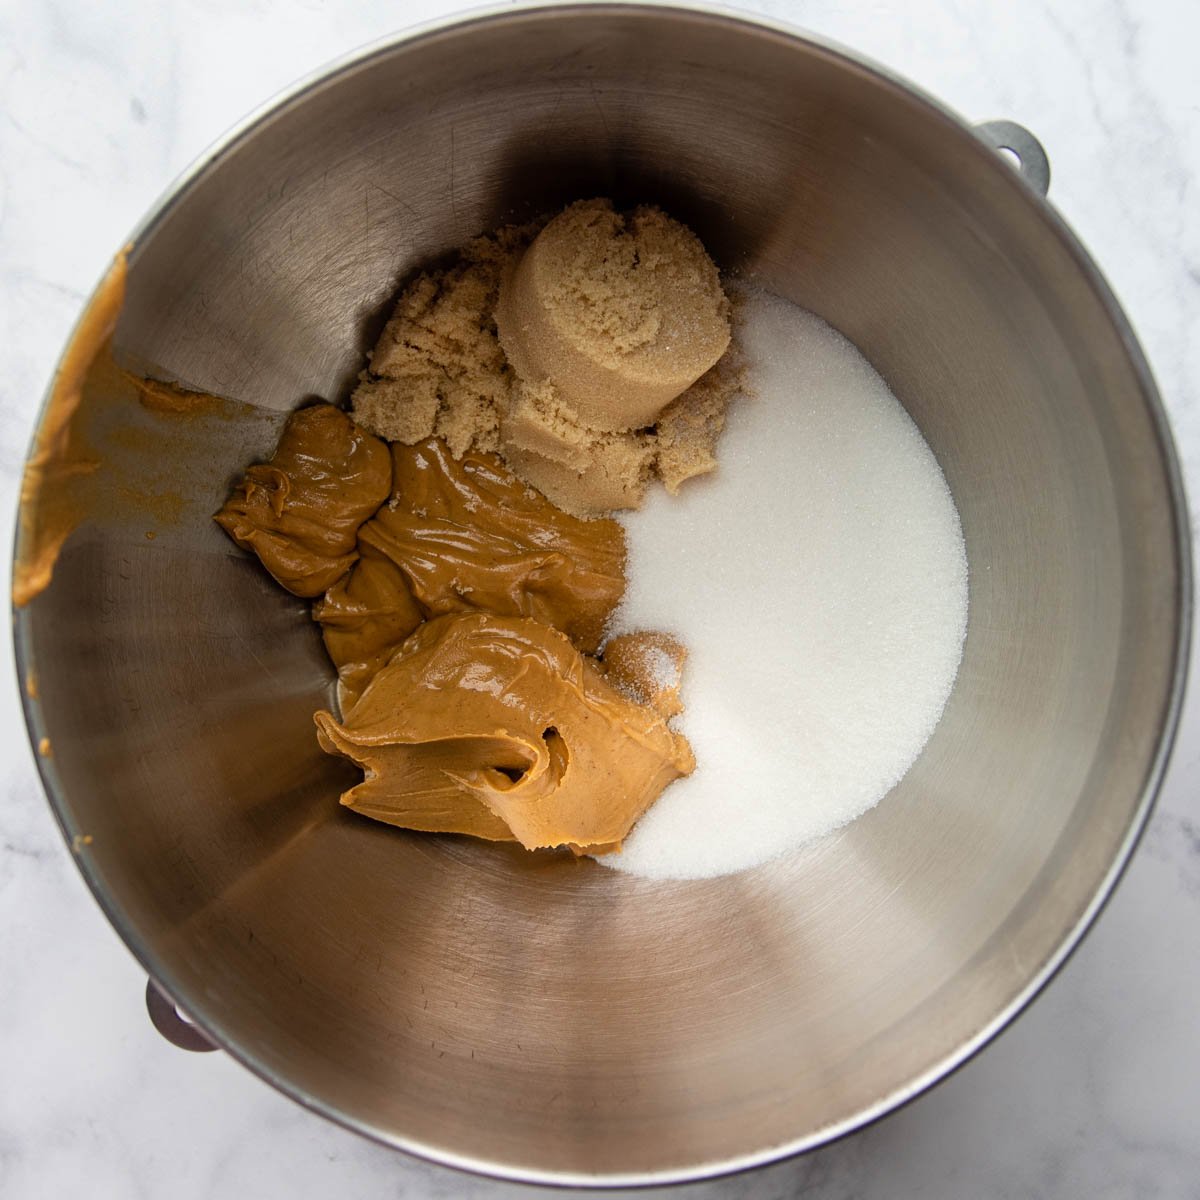 peanut butter and sugars in a mixing bowl.